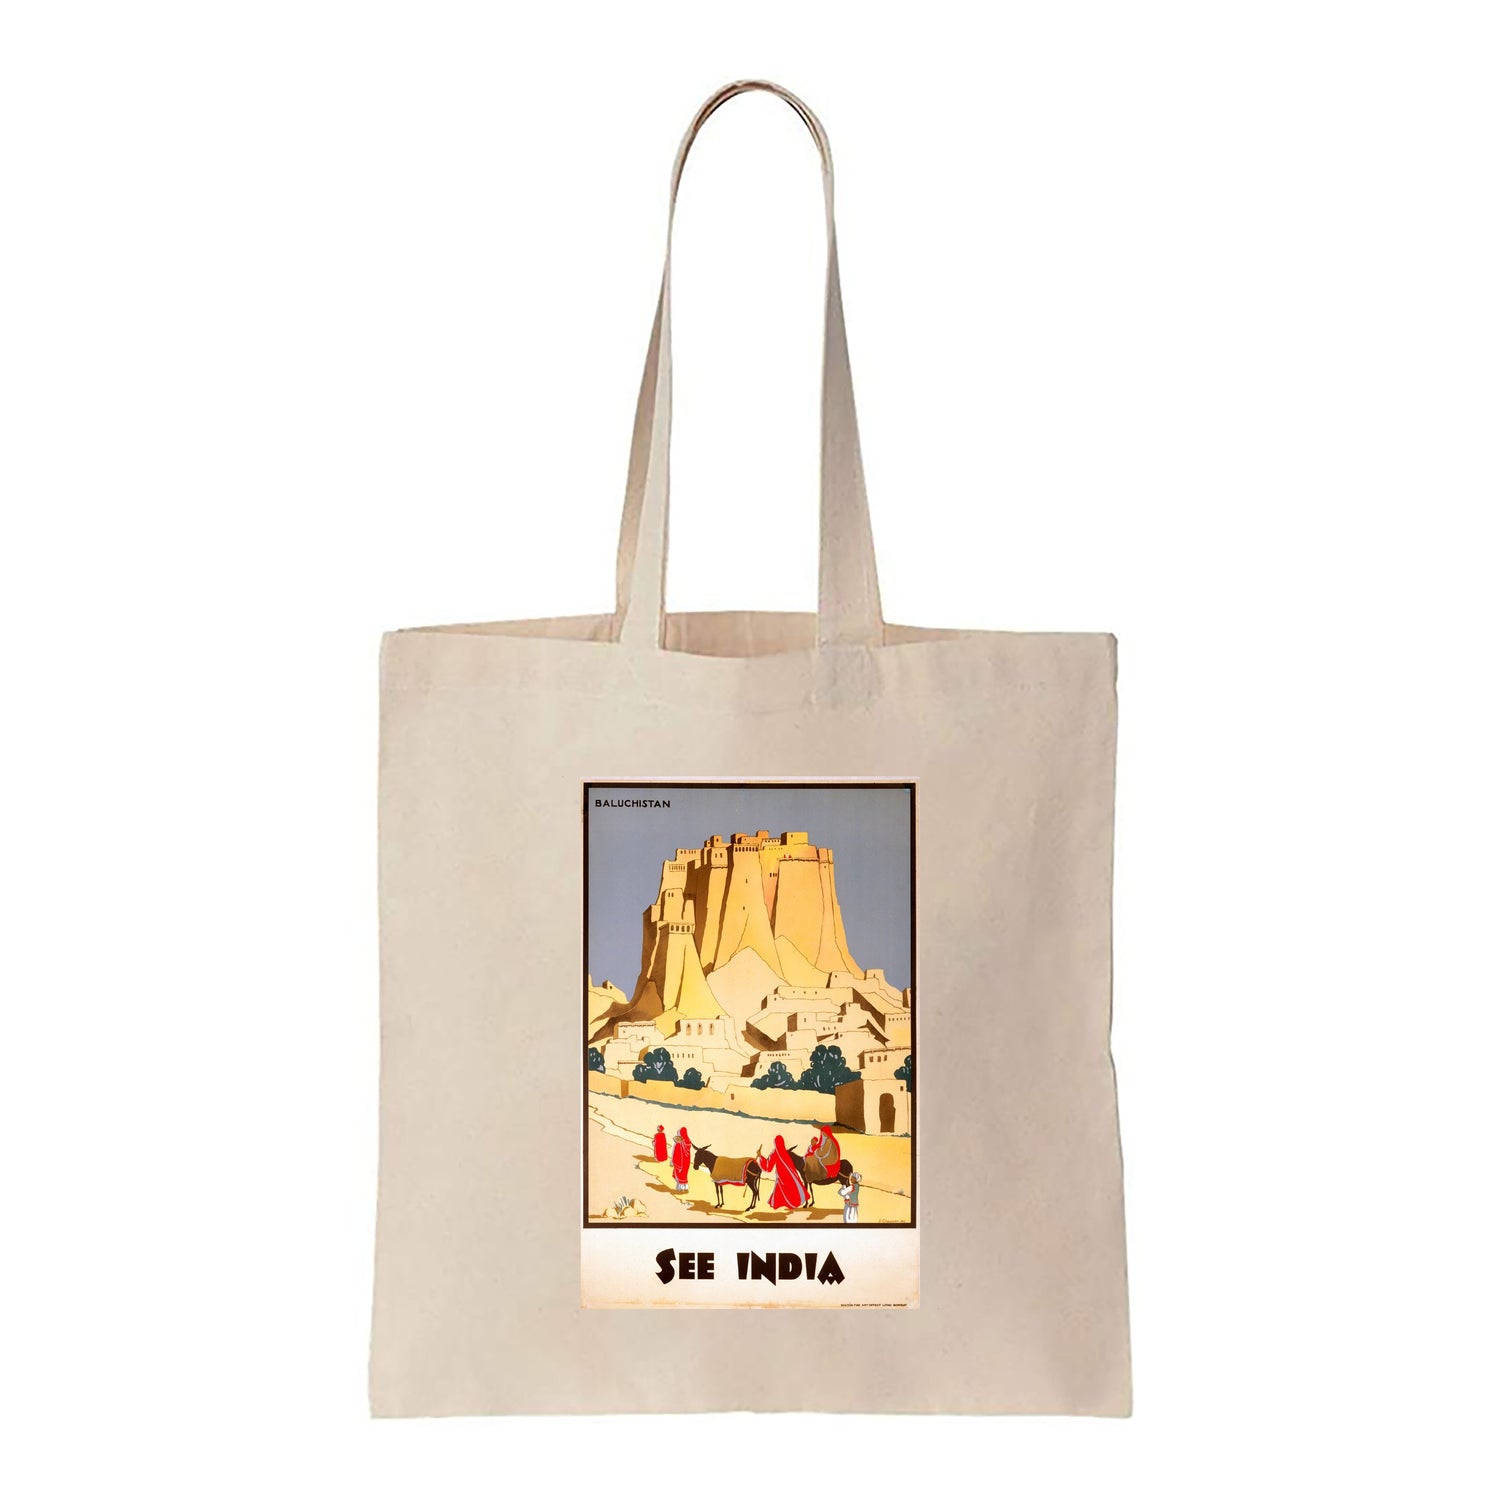 See India - Baluchistan - Canvas Tote Bag